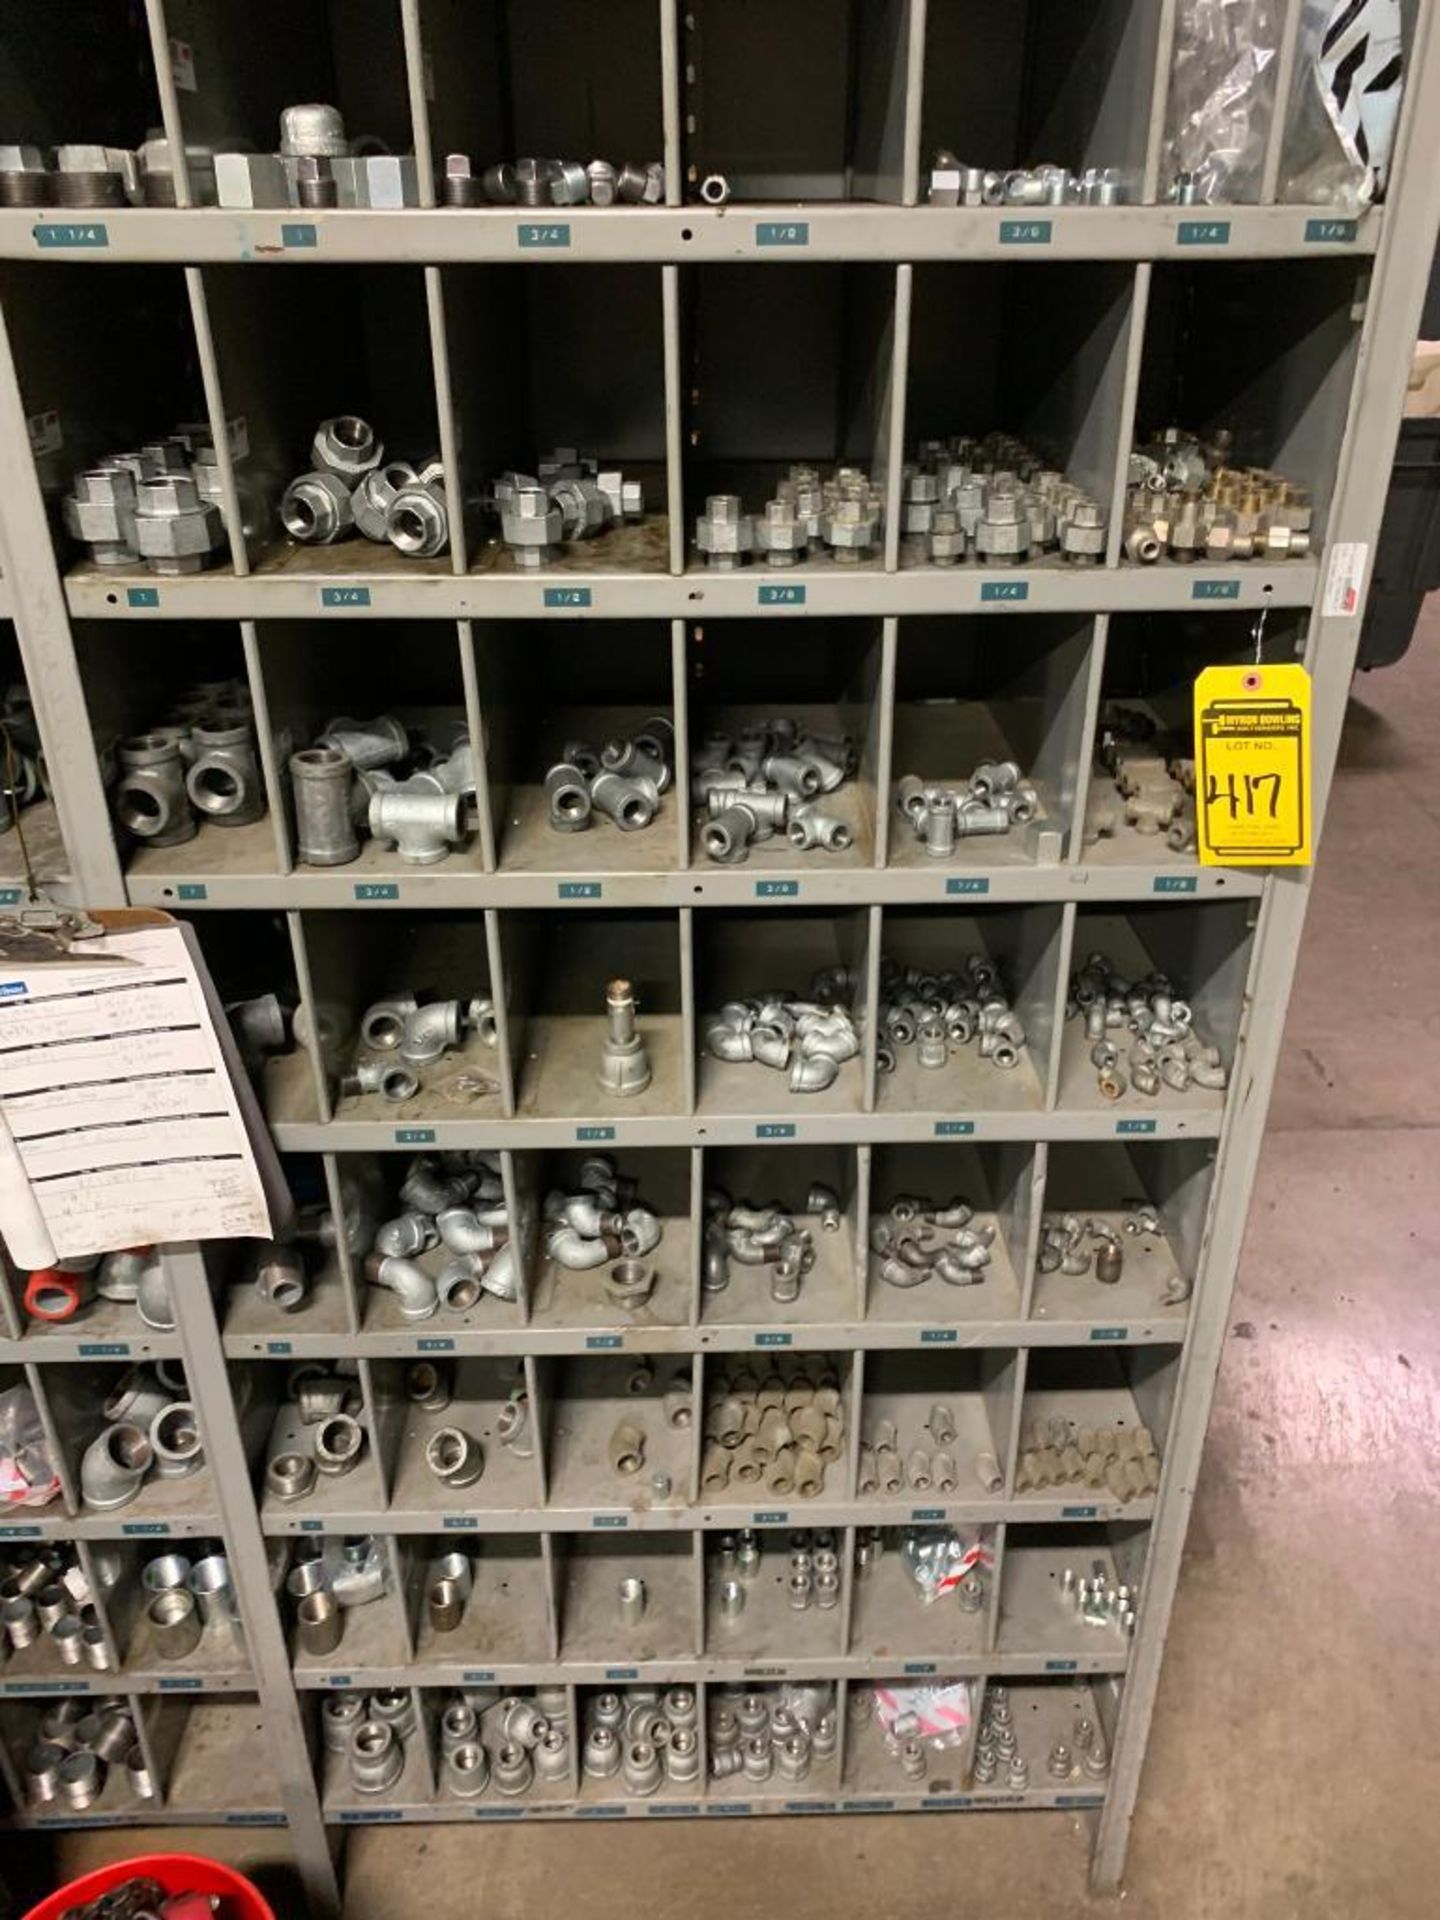 (10x) Bays of Assorted Shelving w/ Pipe Fittings, Pipe Nipples, Elbows, Connectors, Tees, Hardware - Image 3 of 21